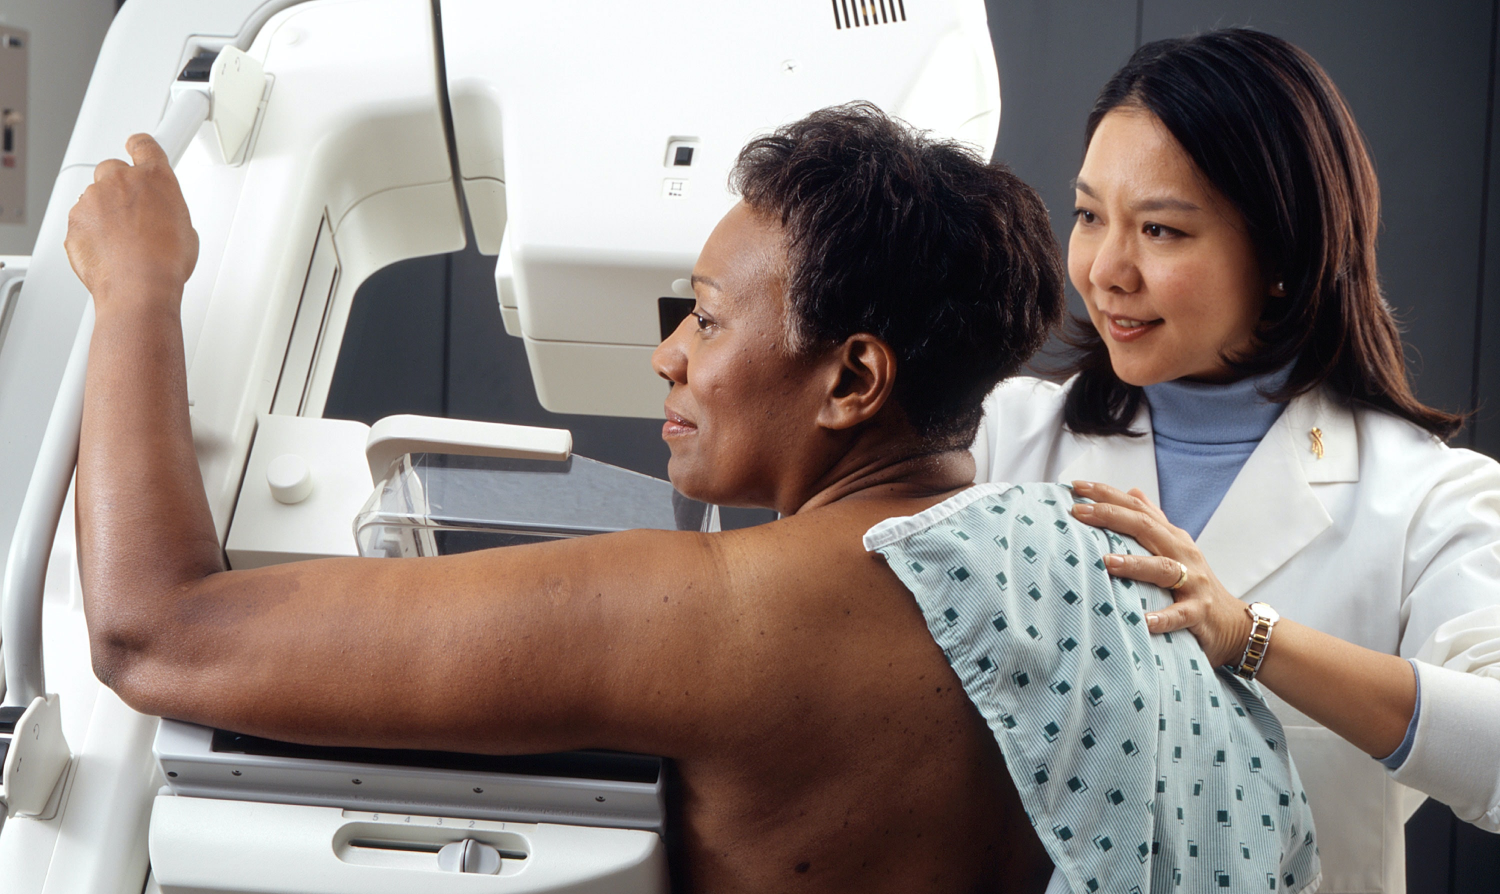 How Can I Find Breast Cancer Screening Near Me?